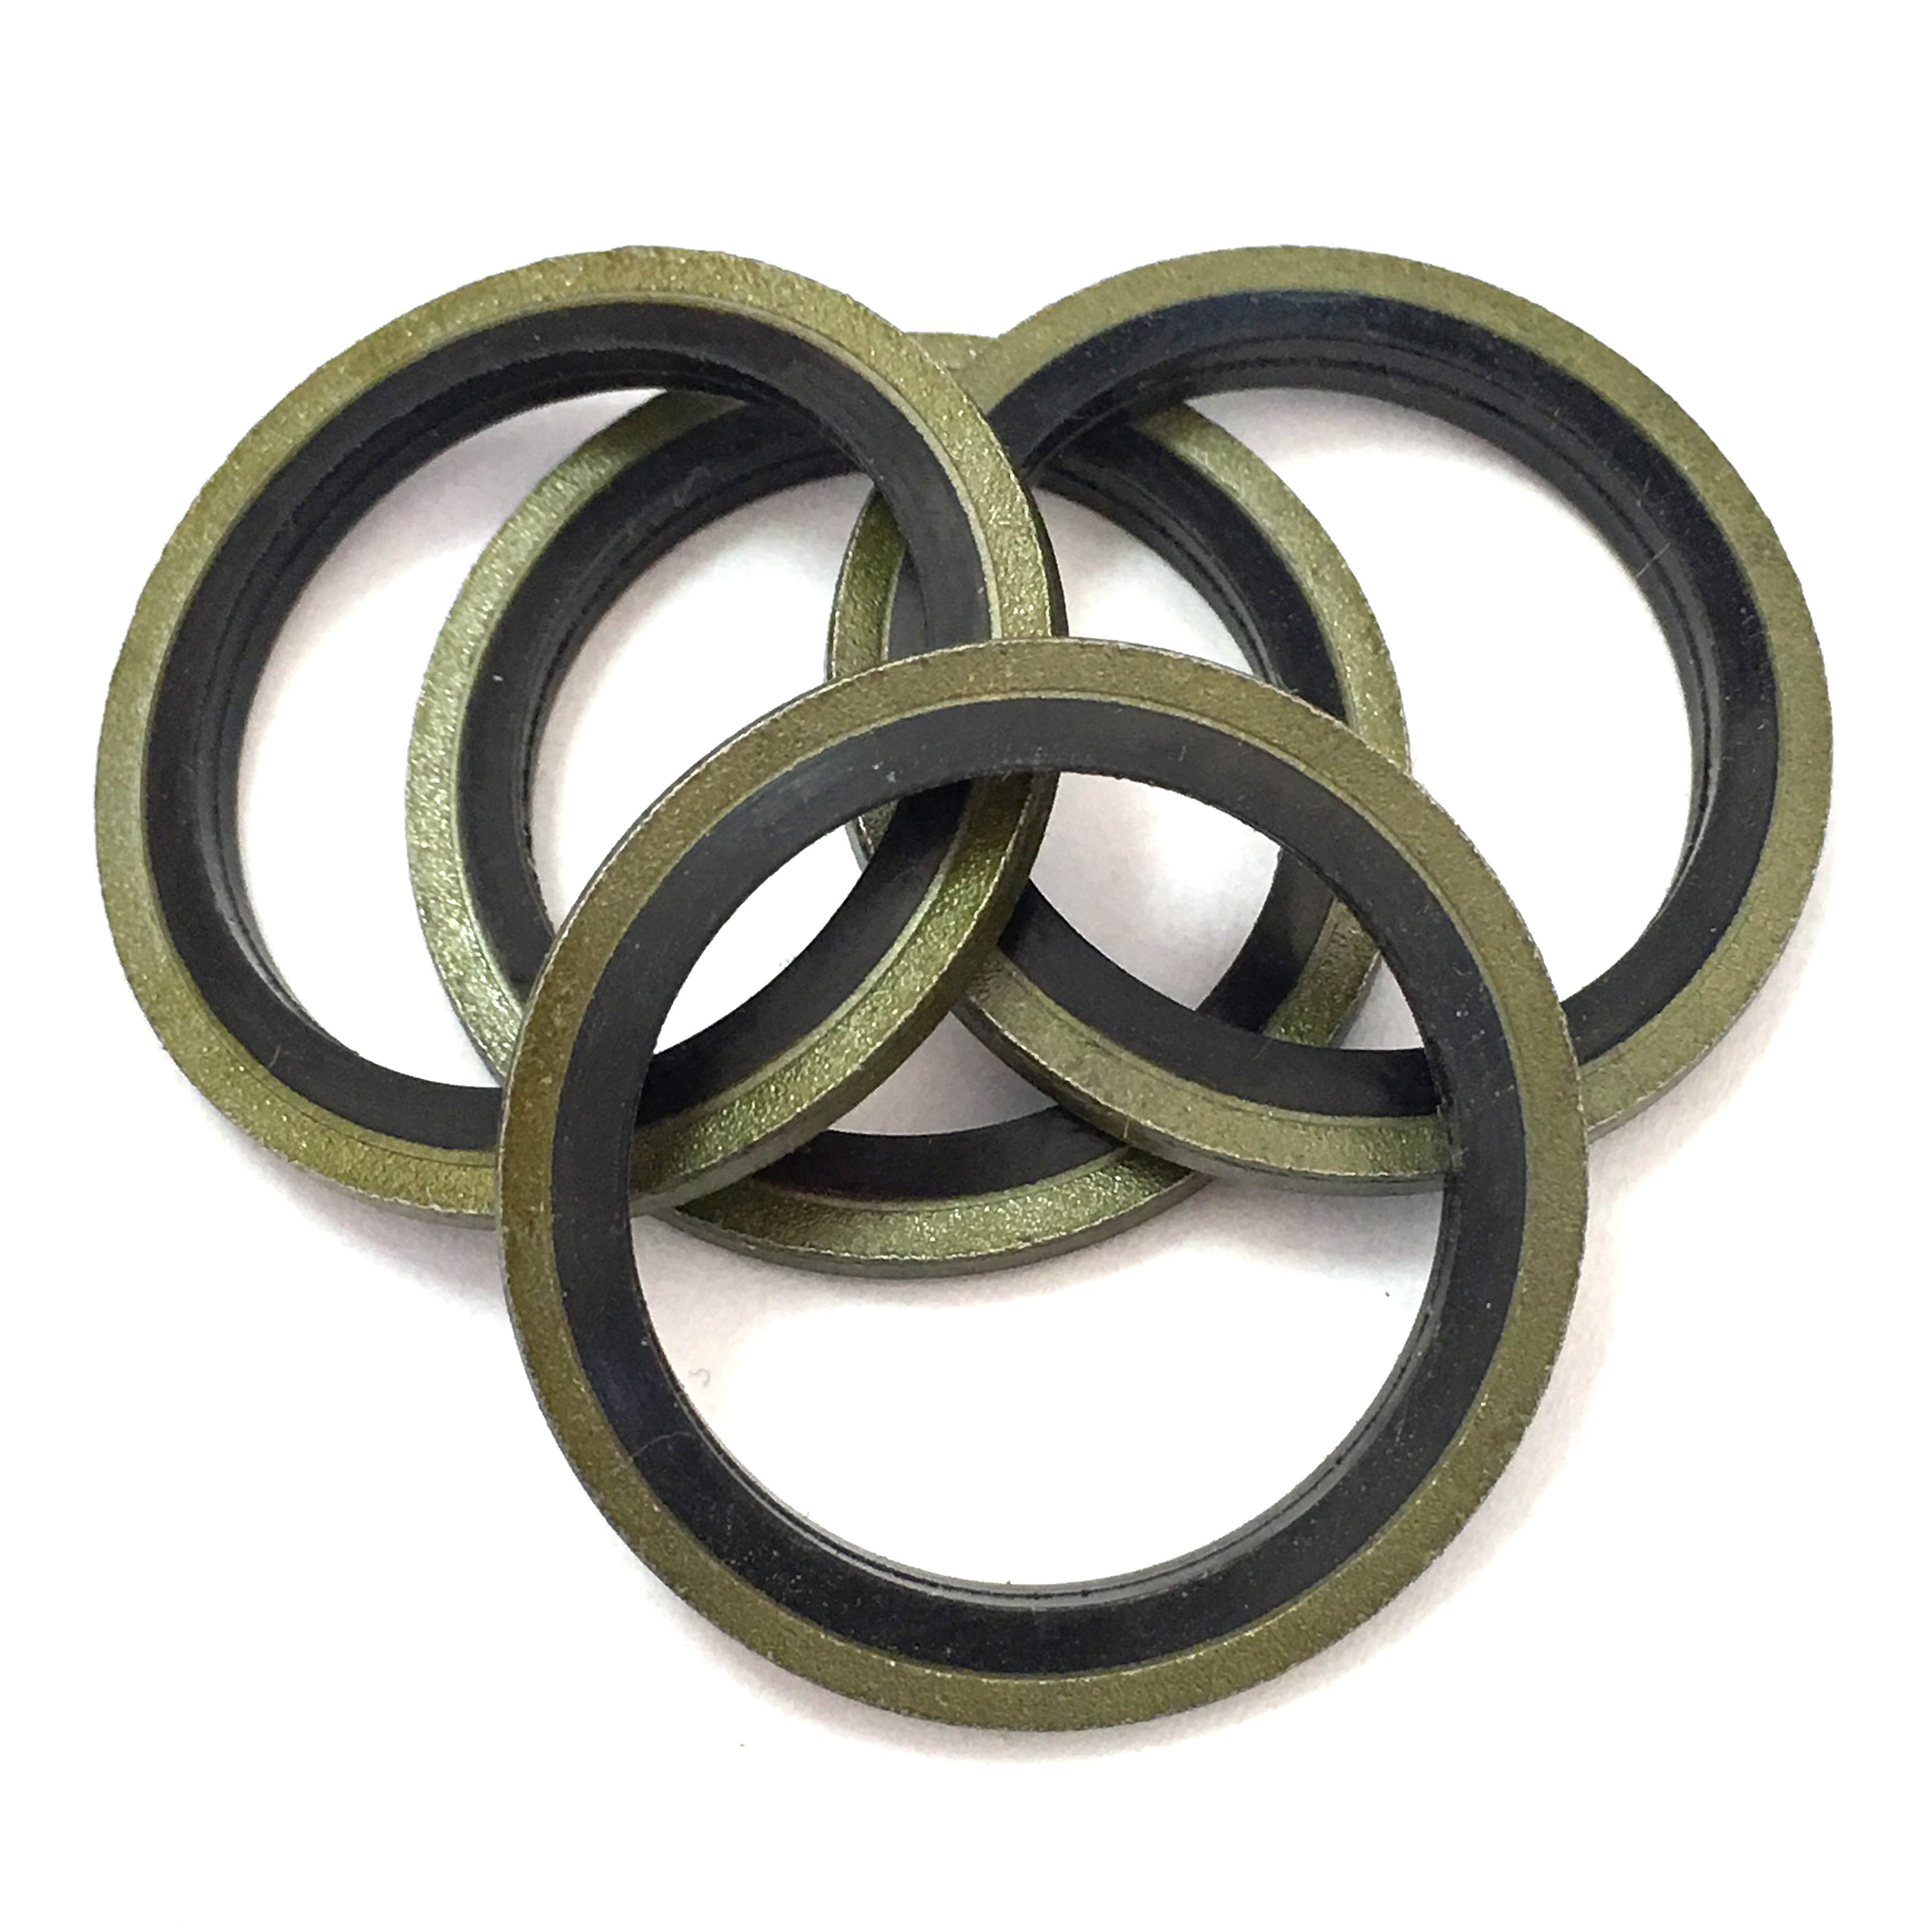 22mm Diameter 2mm Thickness Rubber And Metal Standard Bonded Seal Washer 